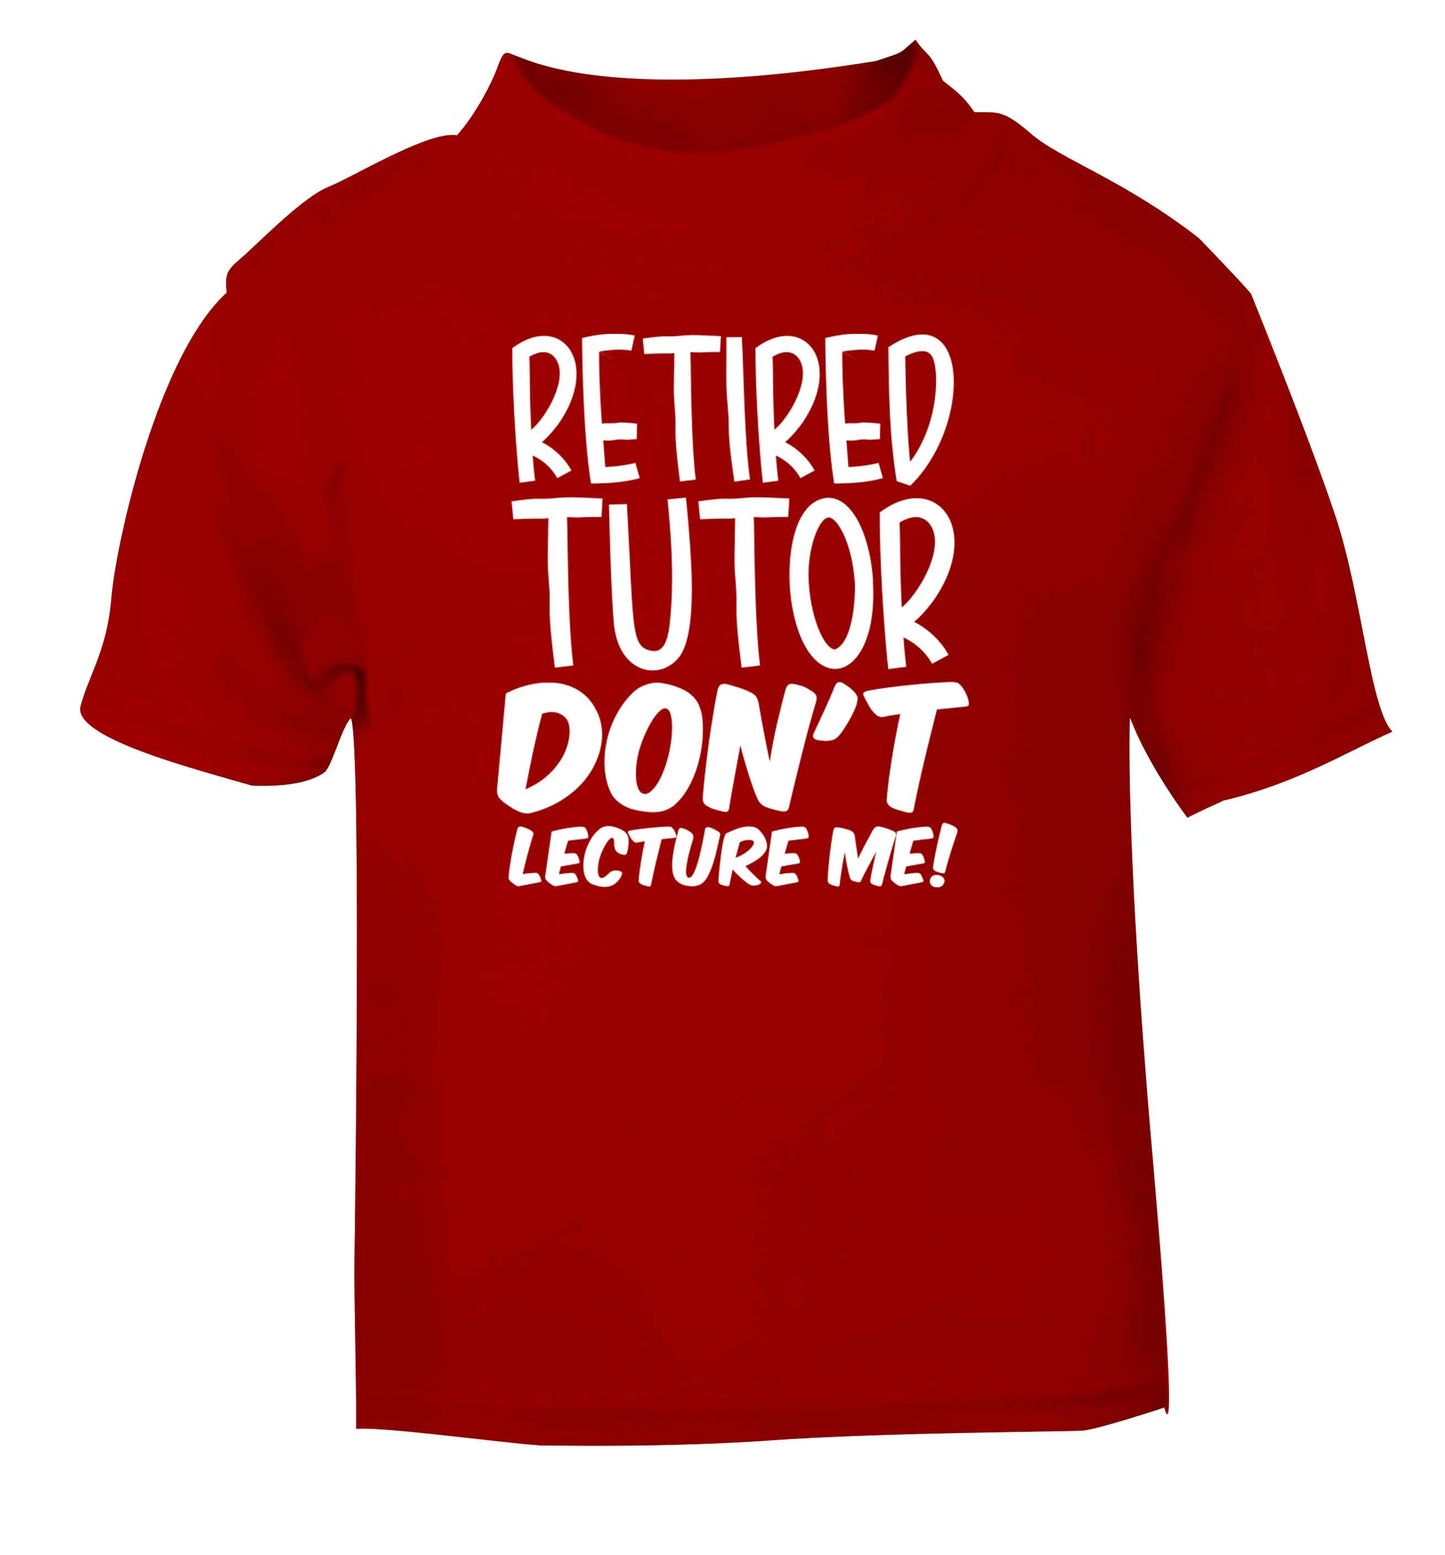 Retired tutor don't lecture me! red Baby Toddler Tshirt 2 Years